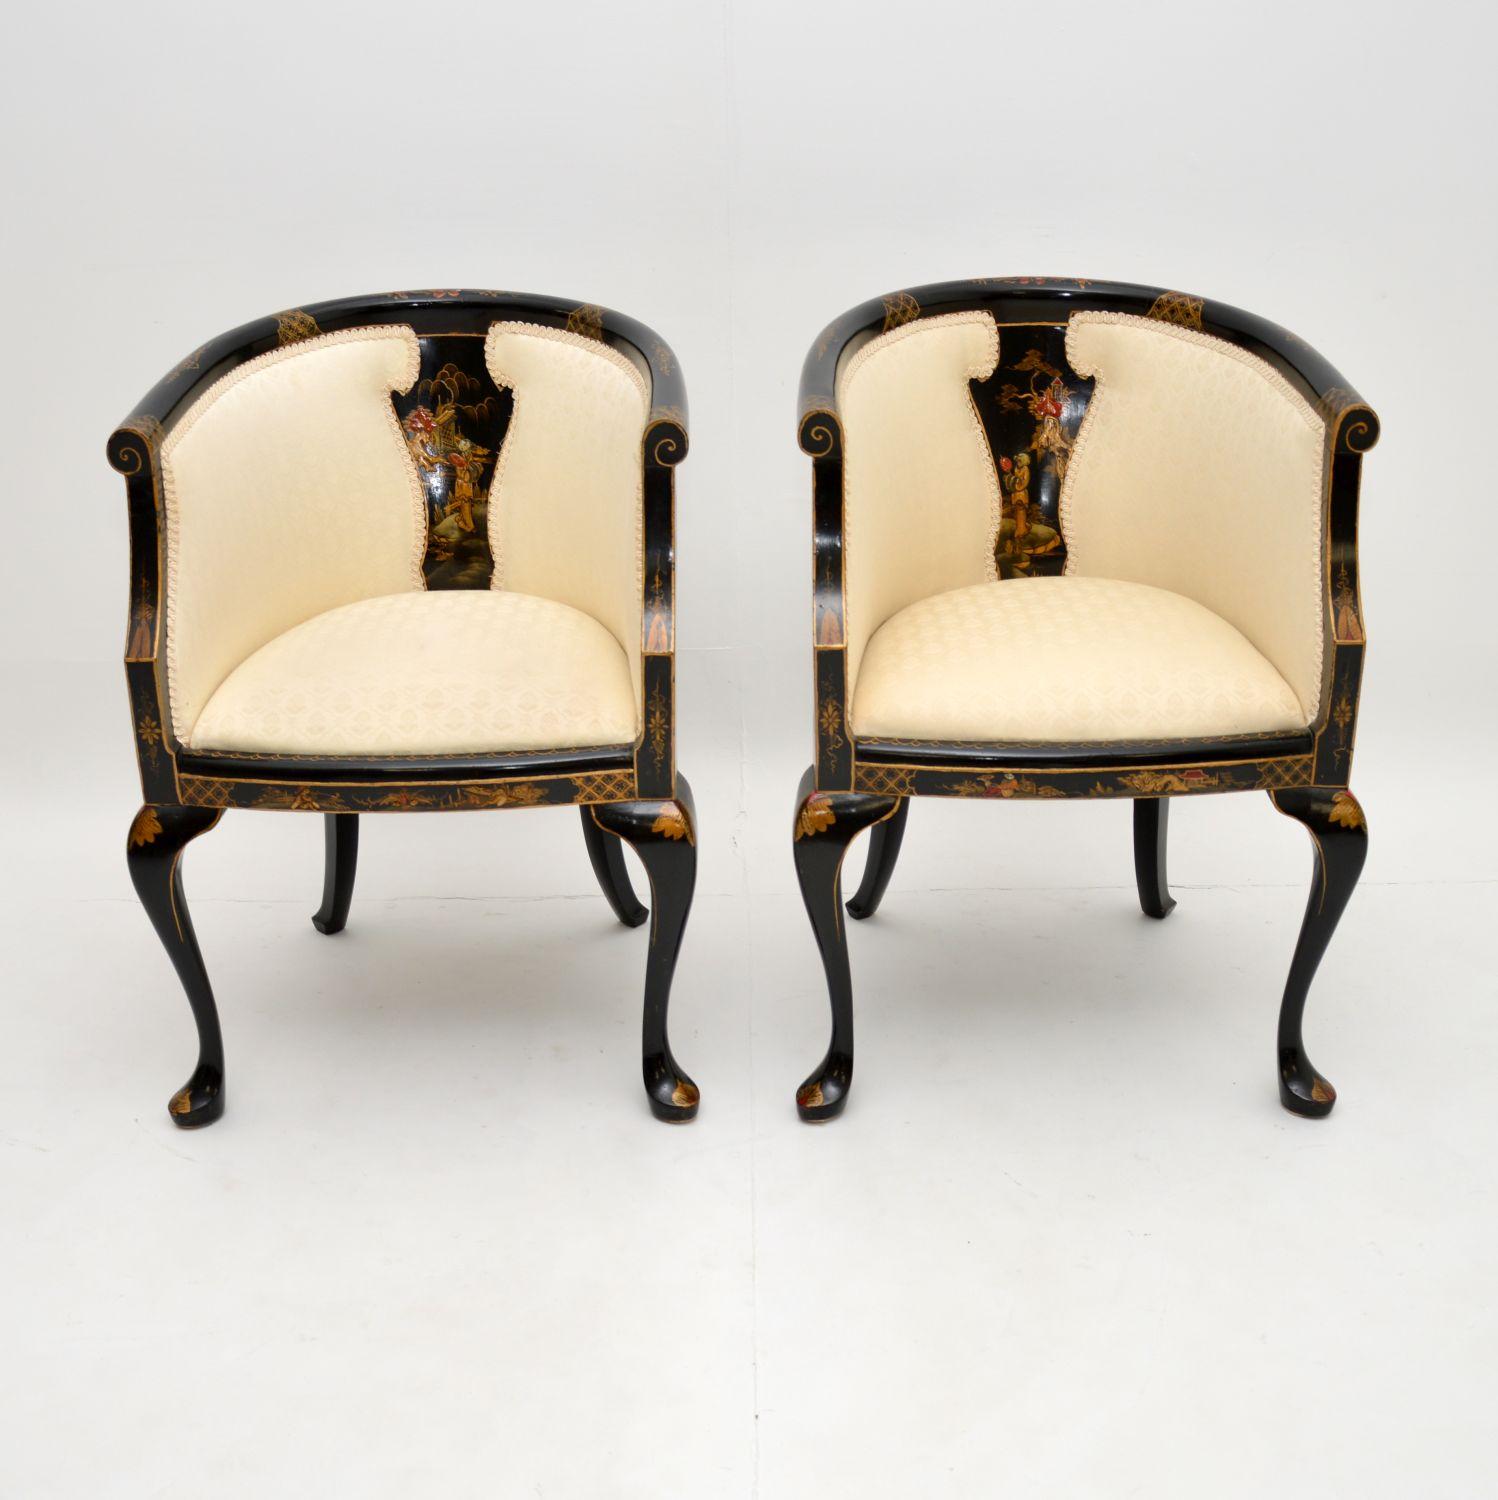 English Pair of Antique Georgian Style Chinoiserie Tub Chairs